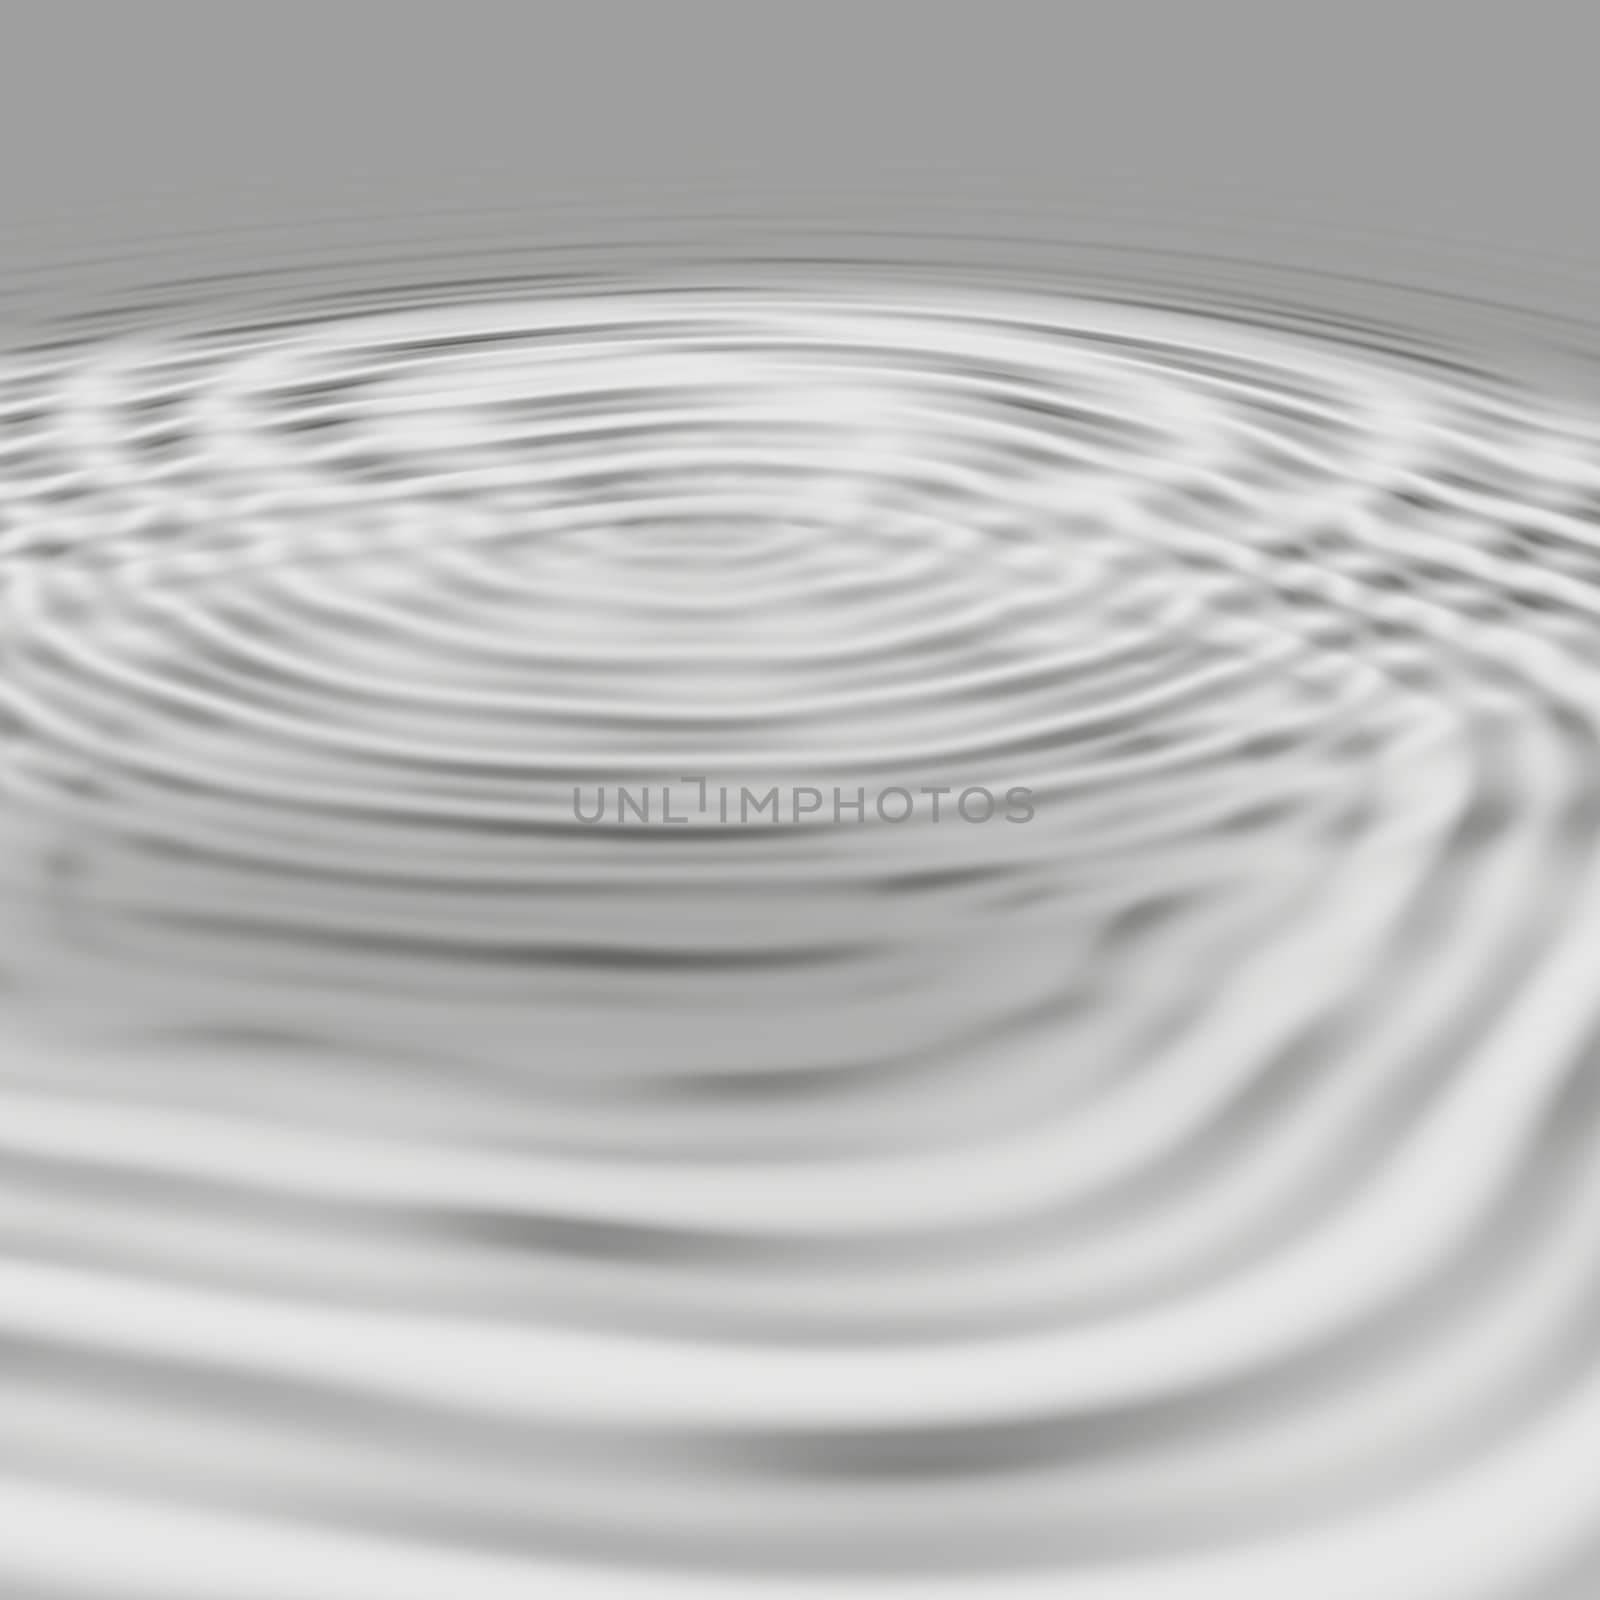 silvery water ripples background

